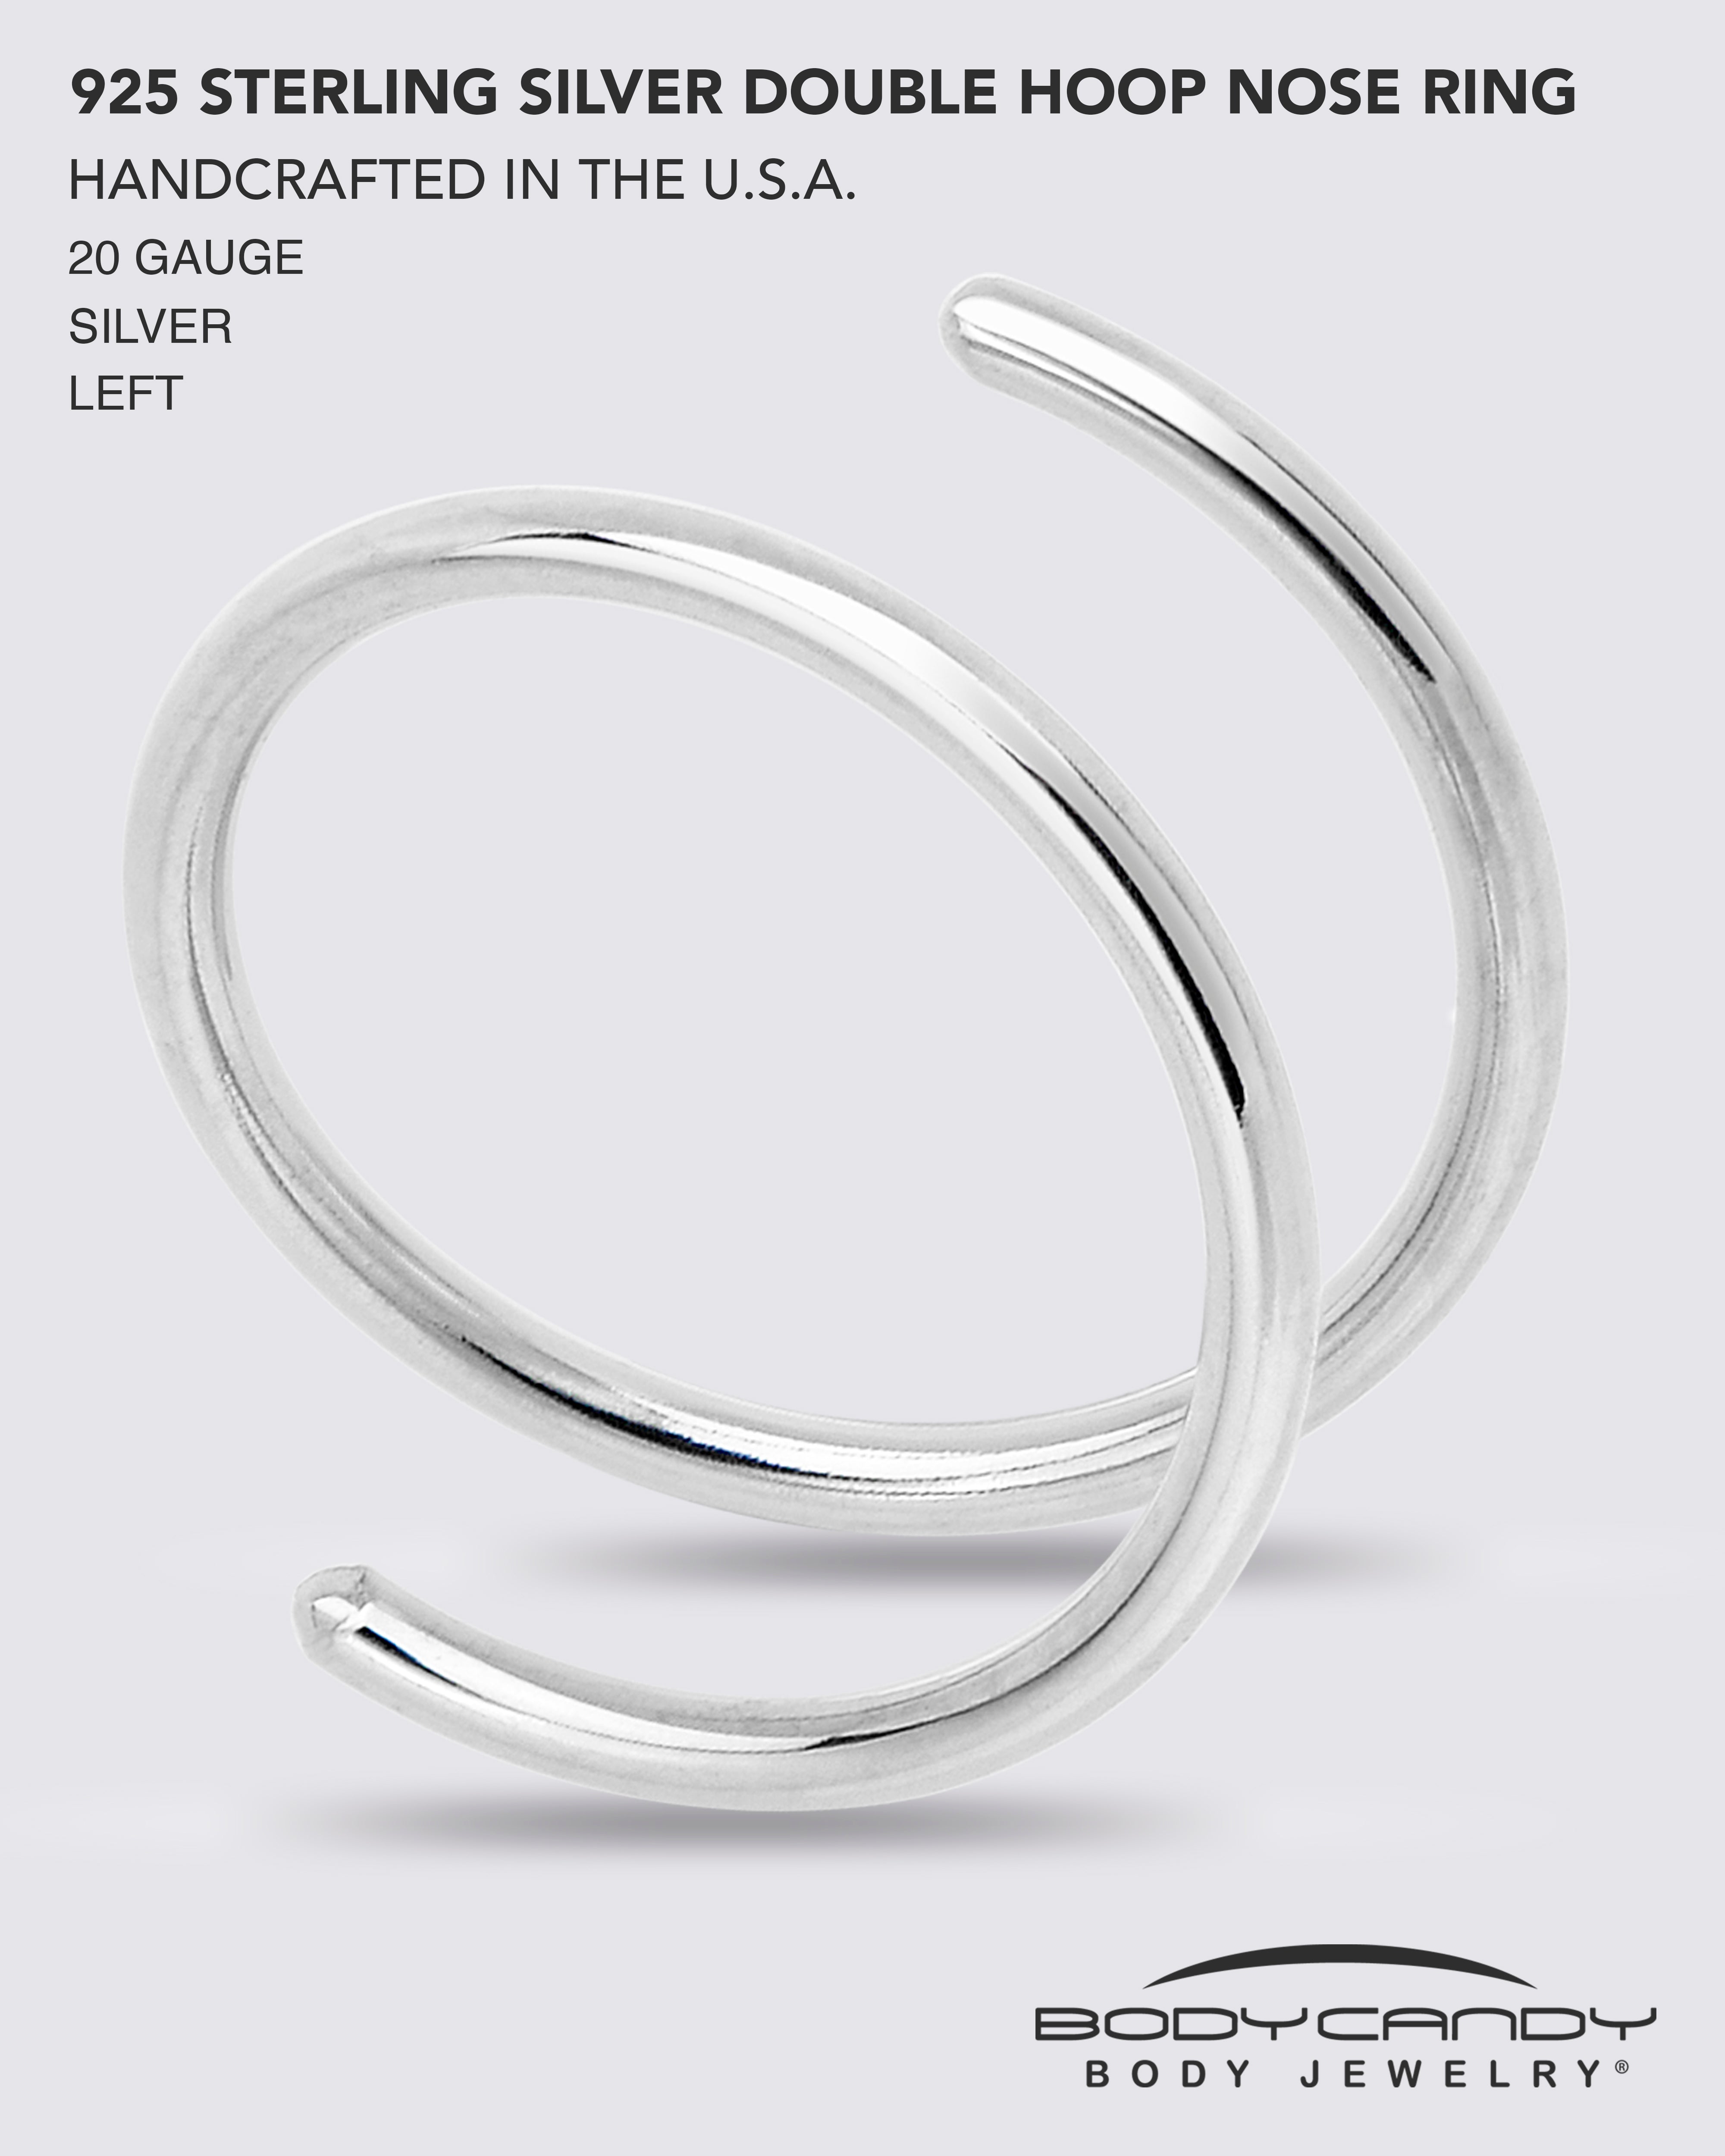 Double Hoop Nose 925 Sterling Silver Spiral Nose Ring (Select Your Size)